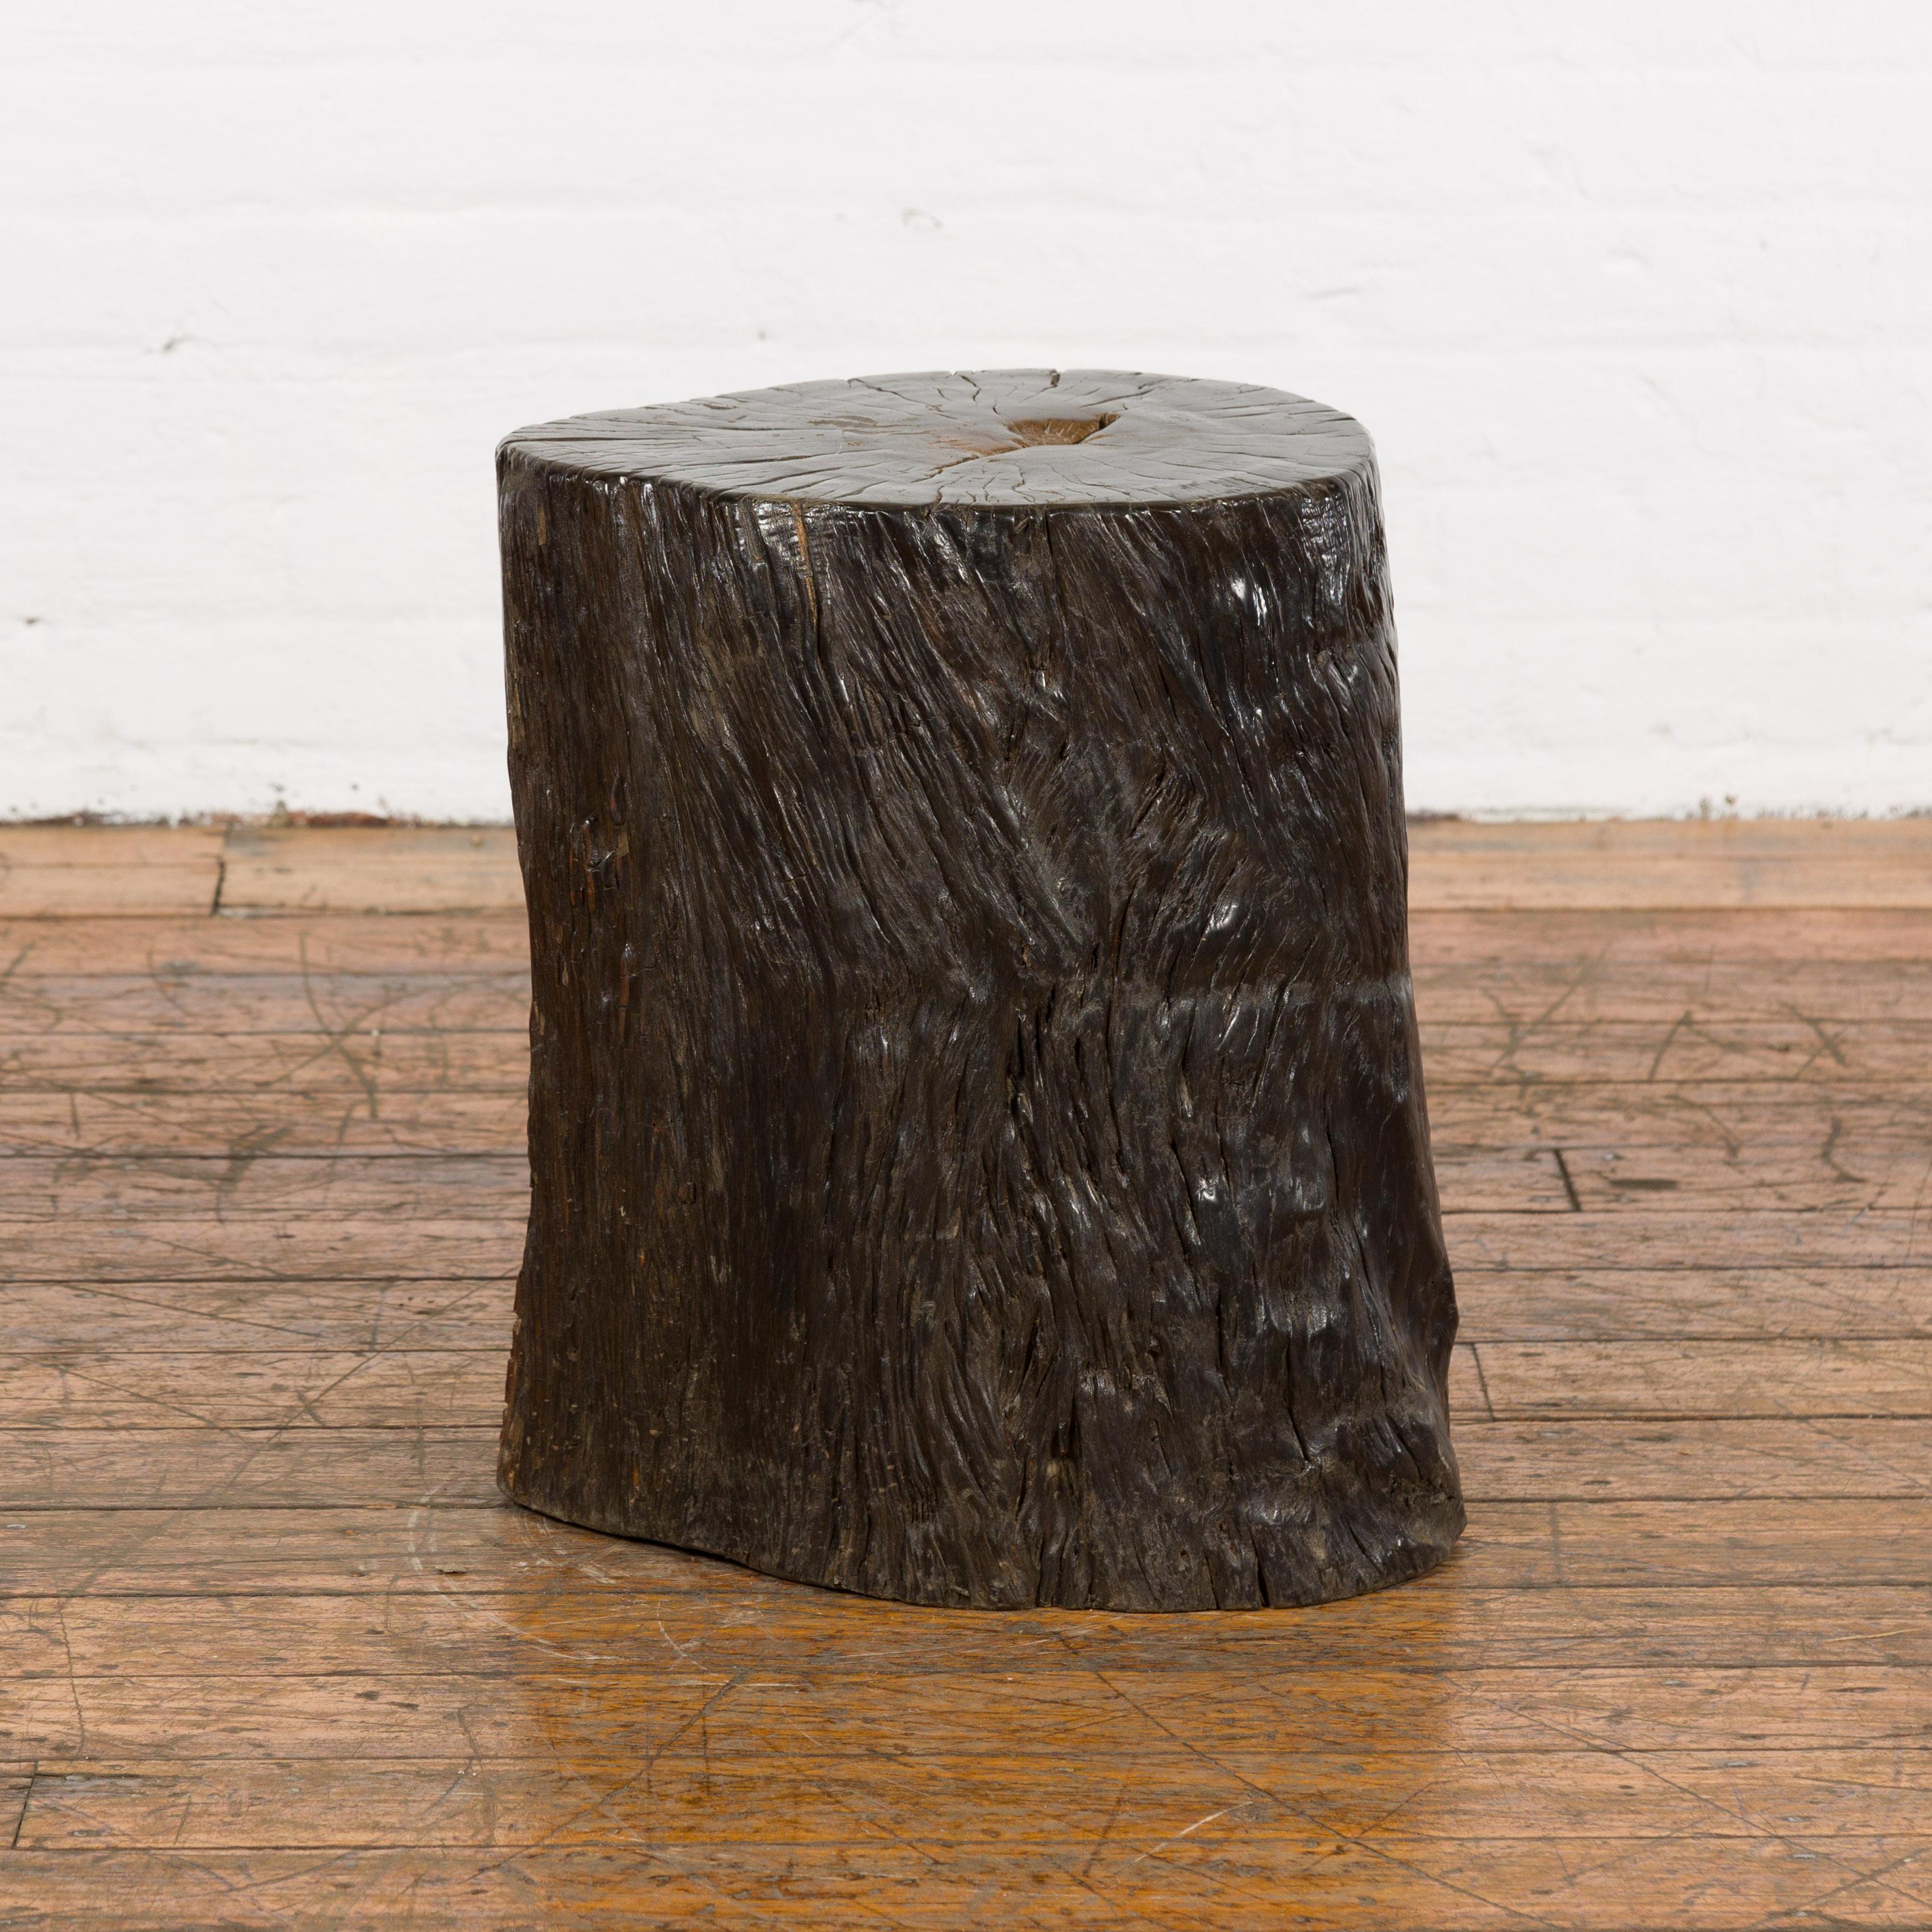 An antique Indonesian petrified wood tree stump drinks table or stool with black color. Bring a slice of Indonesian antiquity into your space with this petrified wood tree stump. Doubling as both a stool and a drinks table, this piece exudes a